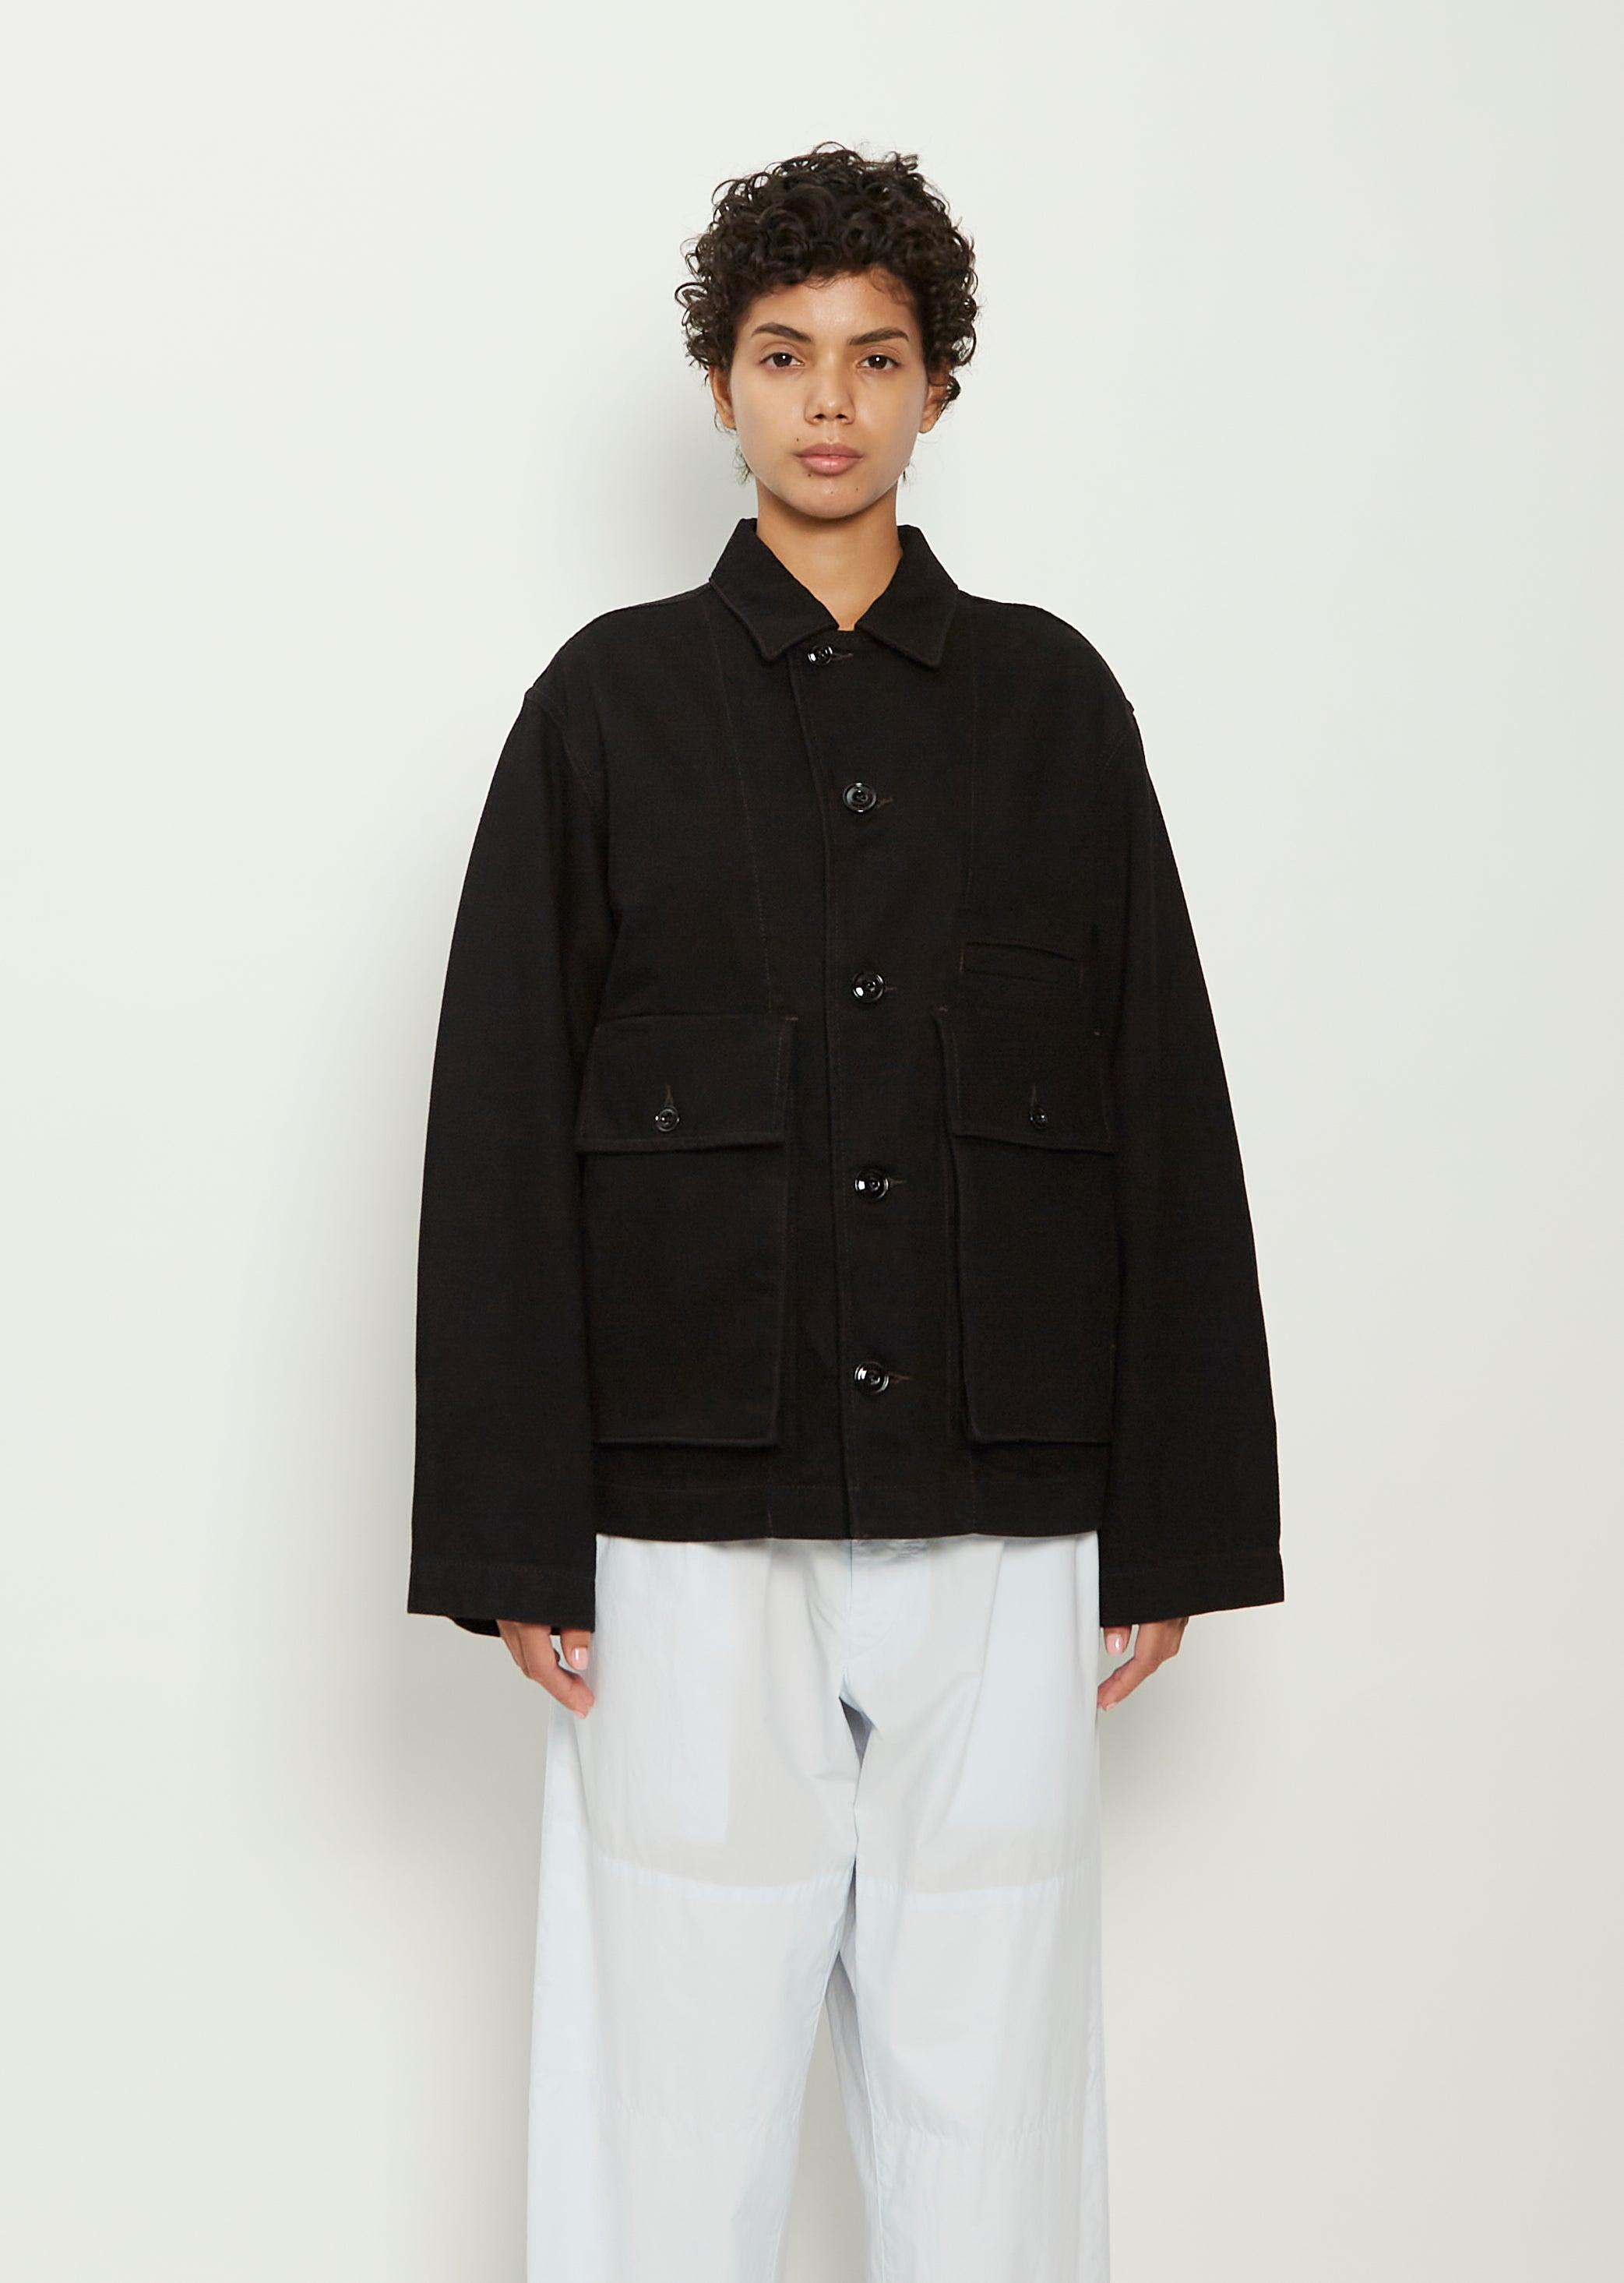 Lemaire Unisex Boxy Cotton Jacket in Black | Lyst